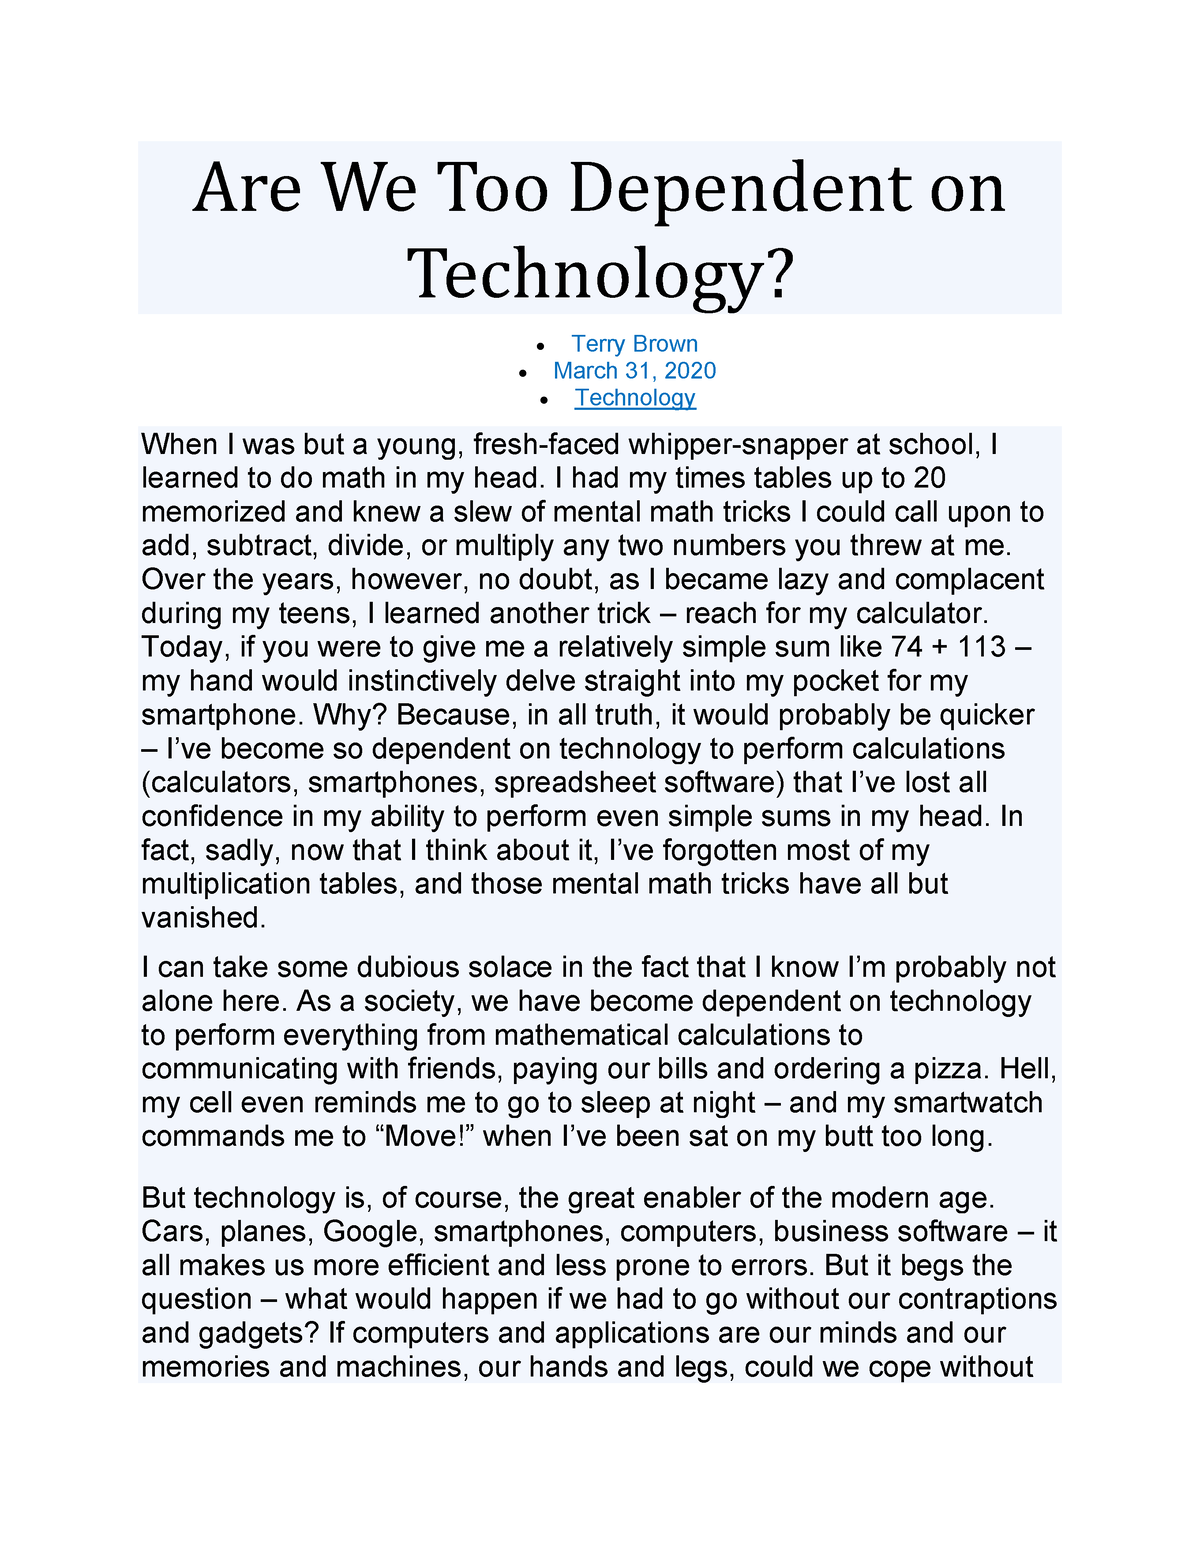 human dependence on technology essay